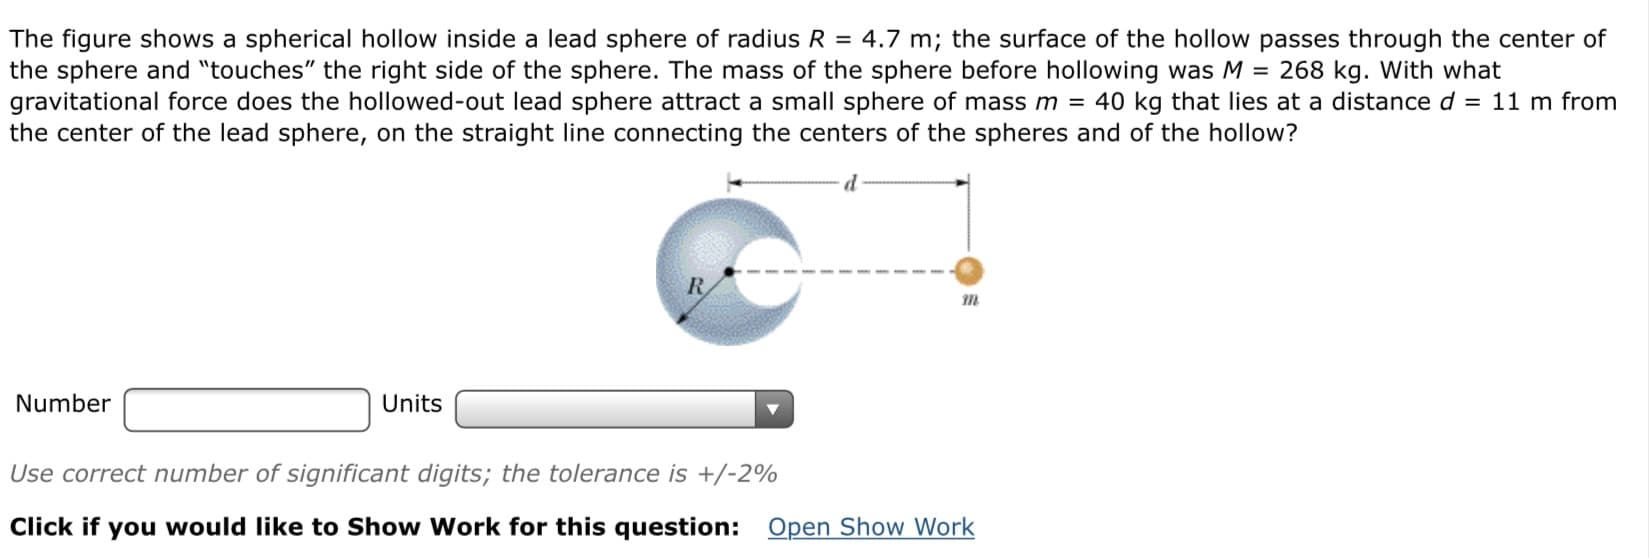 The figure shows a spherical hollow inside a lead sphere of radius R = 4.7 m; the surface of the hollow passes through the center of
the sphere and "touches" the right side of the sphere. The mass of the sphere before hollowing was M = 268 kg. With what
gravitational force does the hollowed-out lead sphere attract a small sphere of mass m = 40 kg that lies at a distance d = 11 m from
the center of the lead sphere, on the straight line connecting the centers of the spheres and of the hollow?
Number
Units
Use correct number of significant digits; the tolerance is +/-2%
Click if you would like to Show Work for this question: Open Show Work
